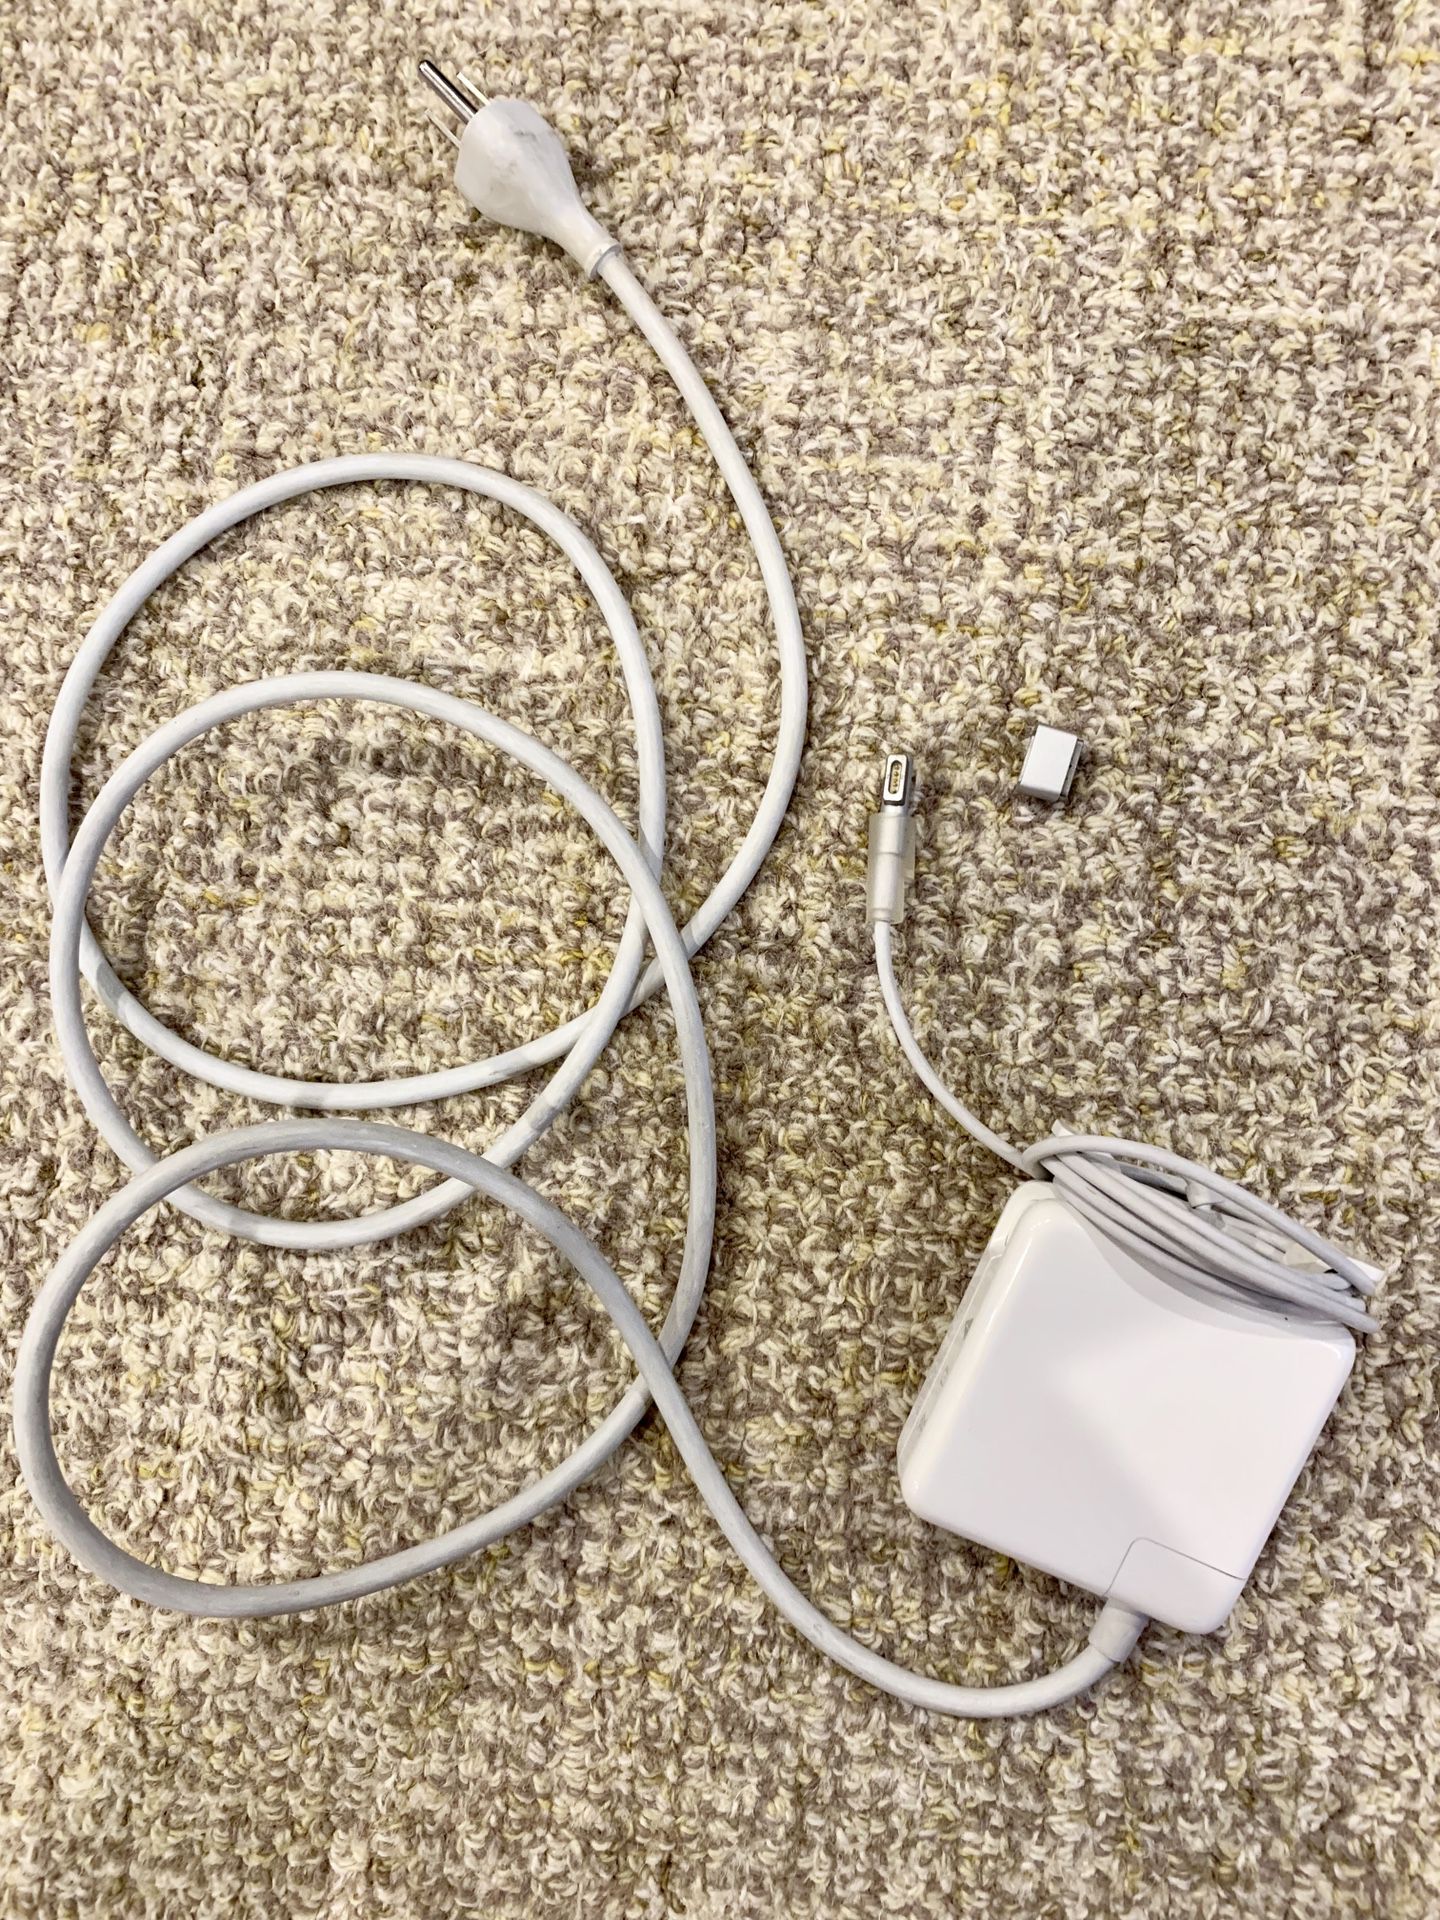 MacBook charger with adapter/ converter